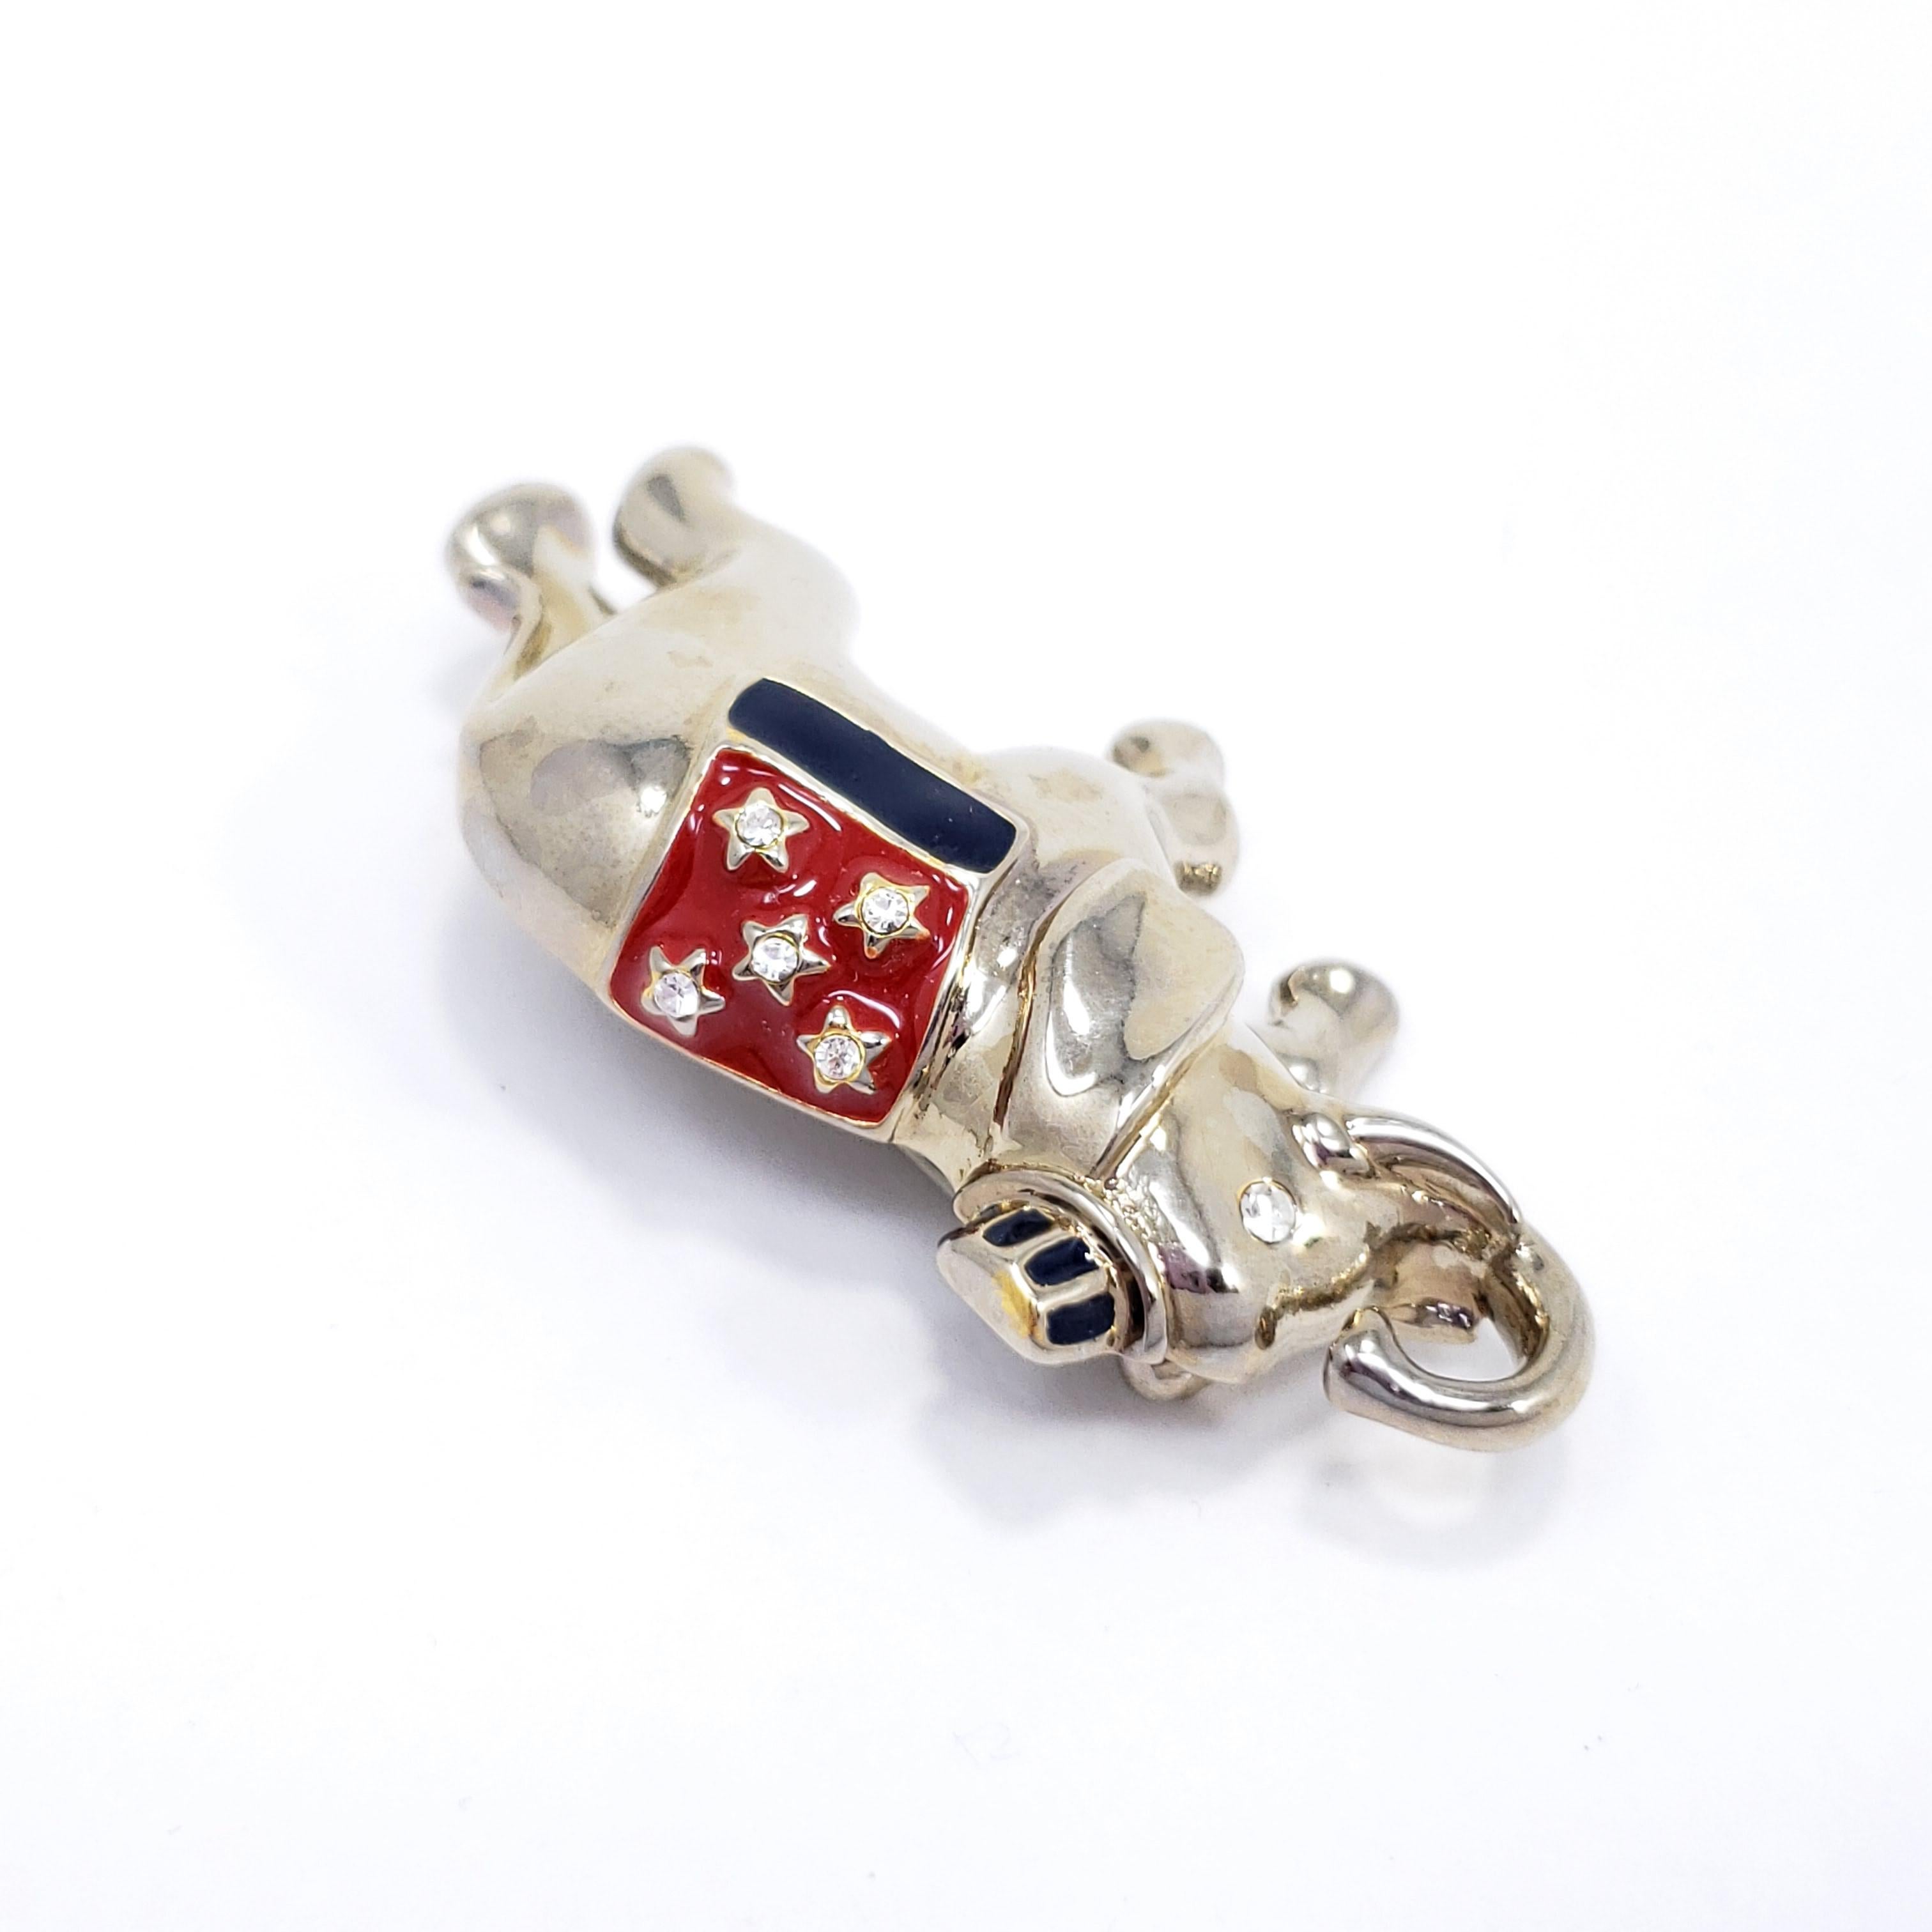 This patriotic pin features a silver-tone elephant, accented with clear crystals and red & blue enamel. By Monet.

Marks / hallmarks / etc: Monet